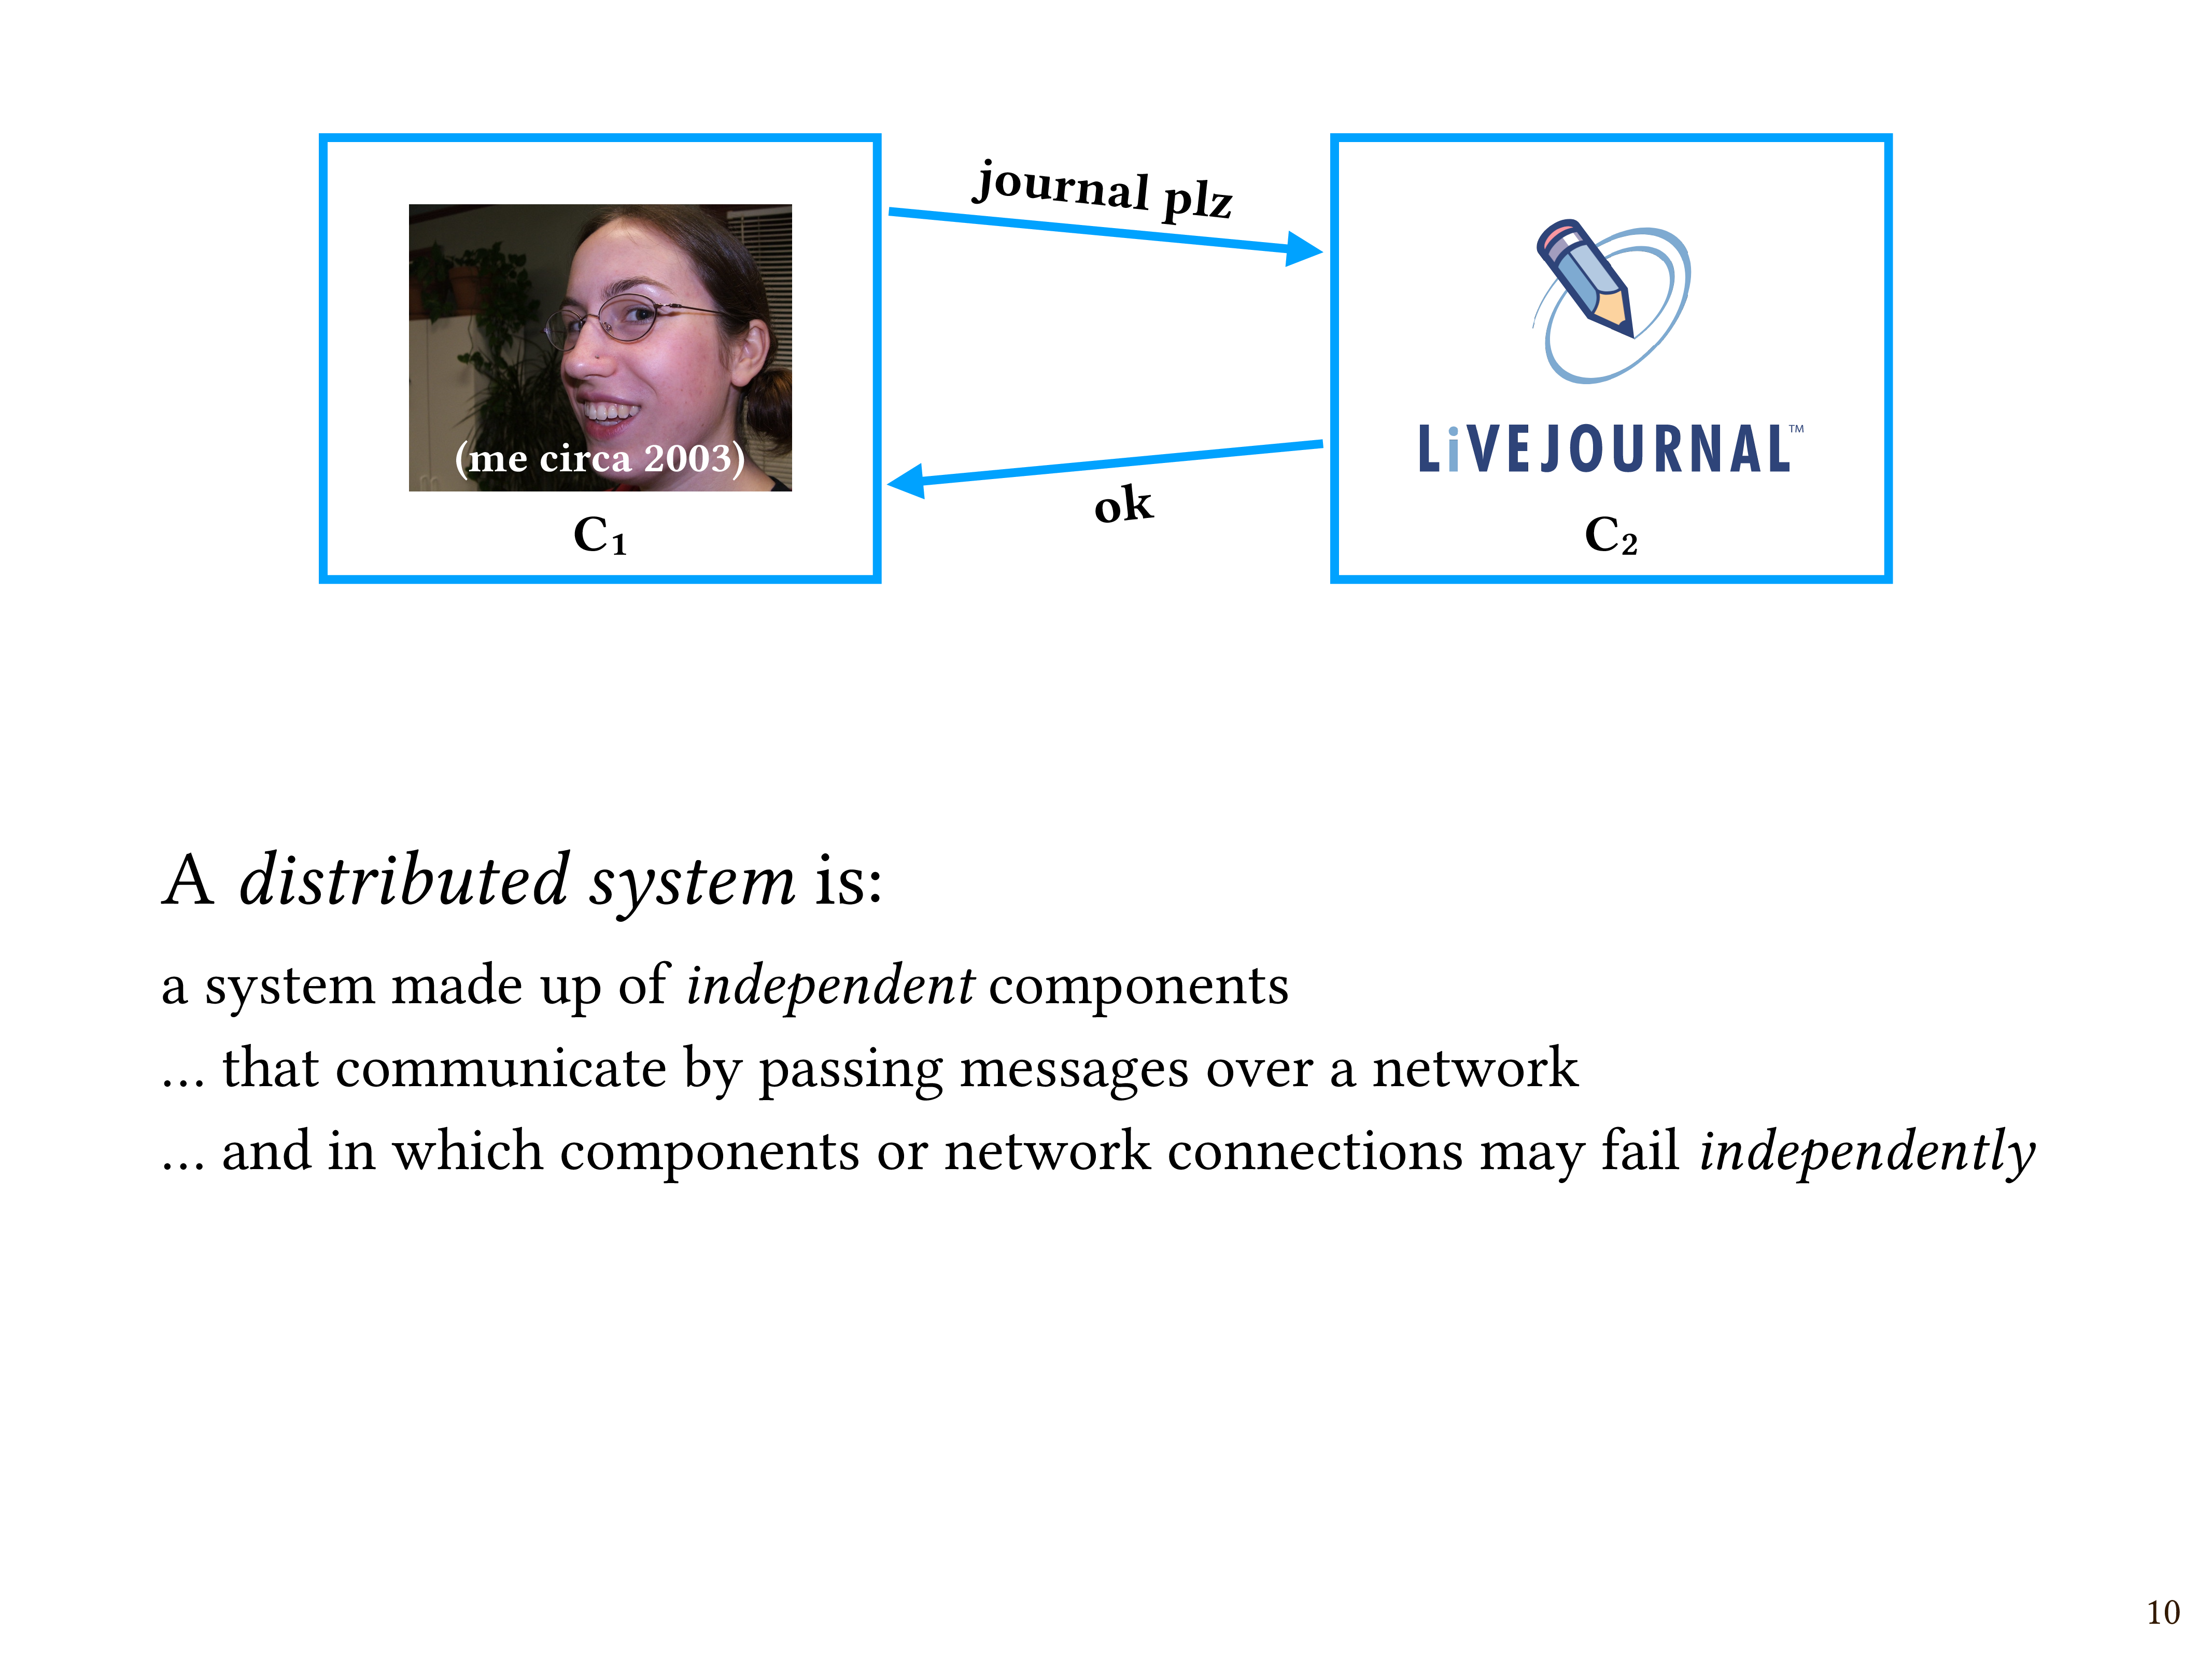 A diagram showing an exchange of two messages between me (circa 2003) and the LiveJournal website, followed by a definition of 'distributed system': a system made up of independent components that communicate by passing messages over a network, and in which components or network connections may fail independently